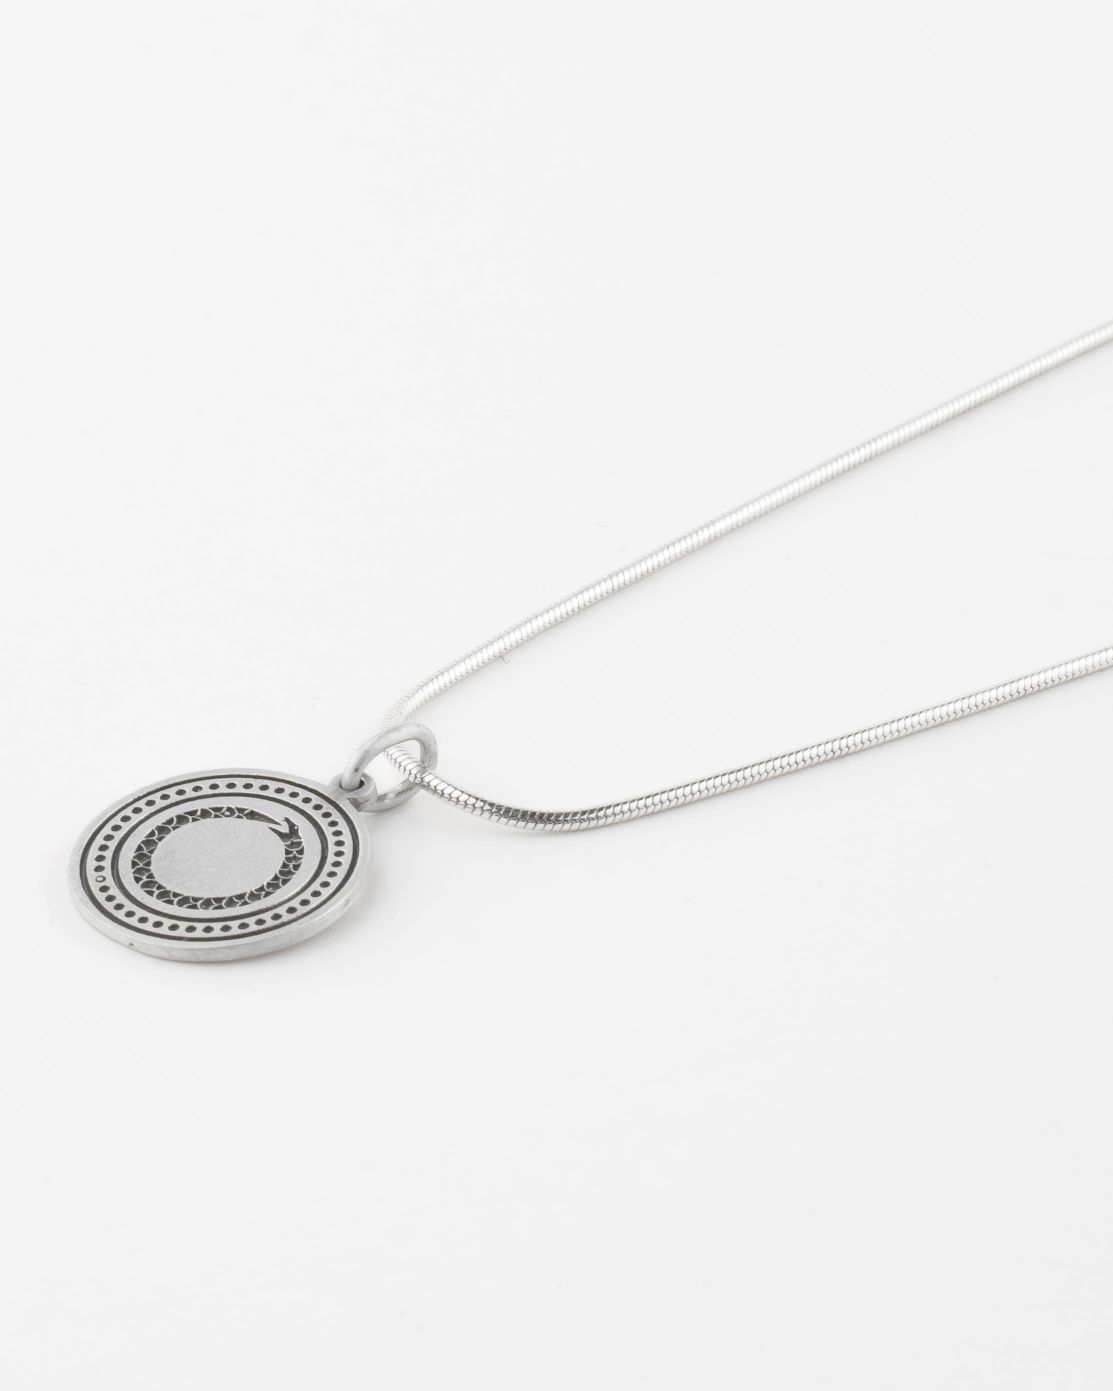 Ouroboros - 925 Sterling Silver Necklace - Silver Accessories - Online Unissex Jewelry - Dicci